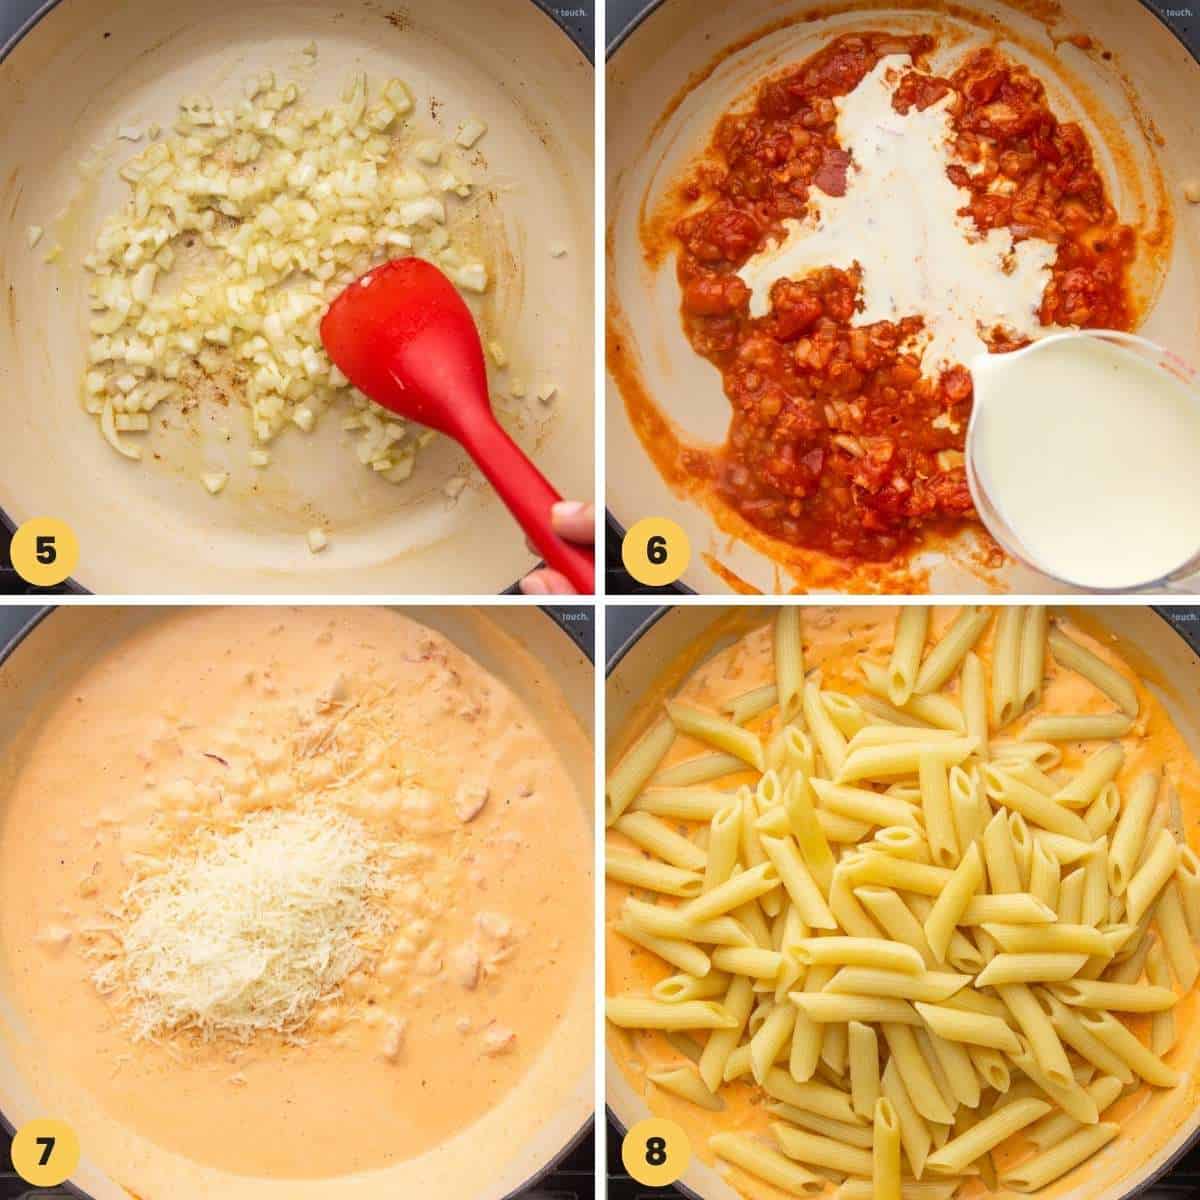 four images showing how to make a cajun alfredo sauce.